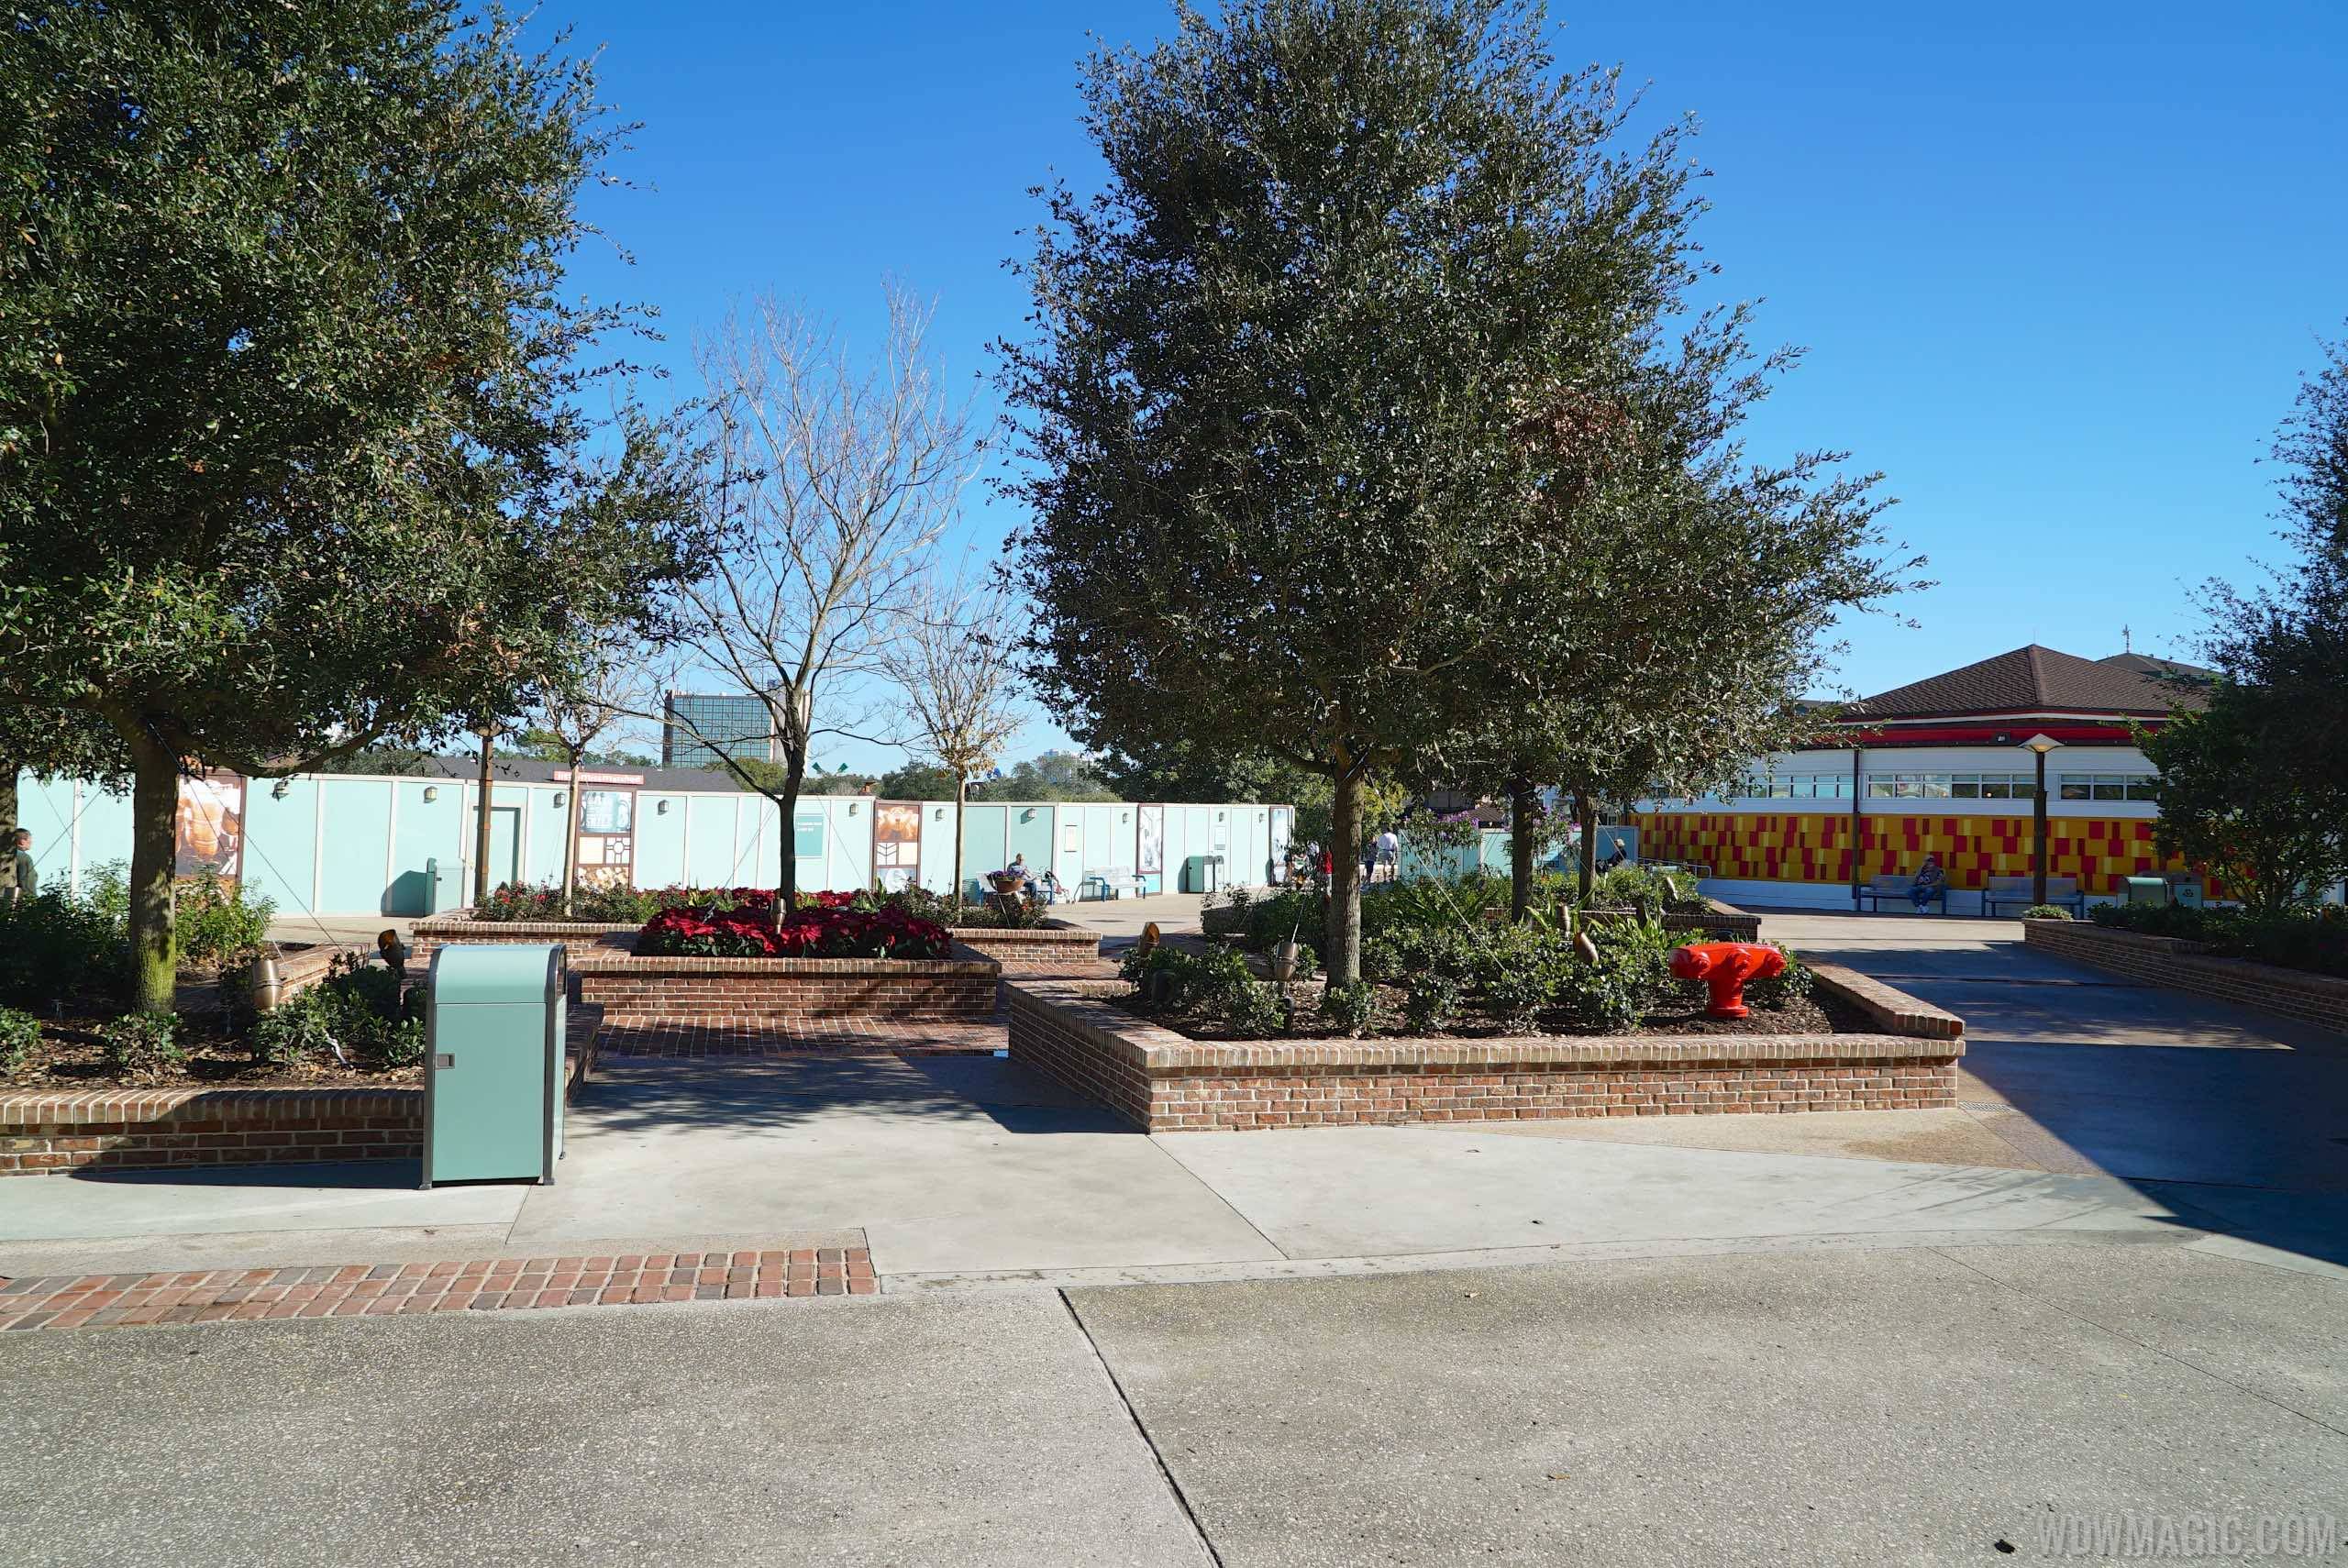 PHOTOS - More construction walls come down around Inspiration Park in the Marketplace